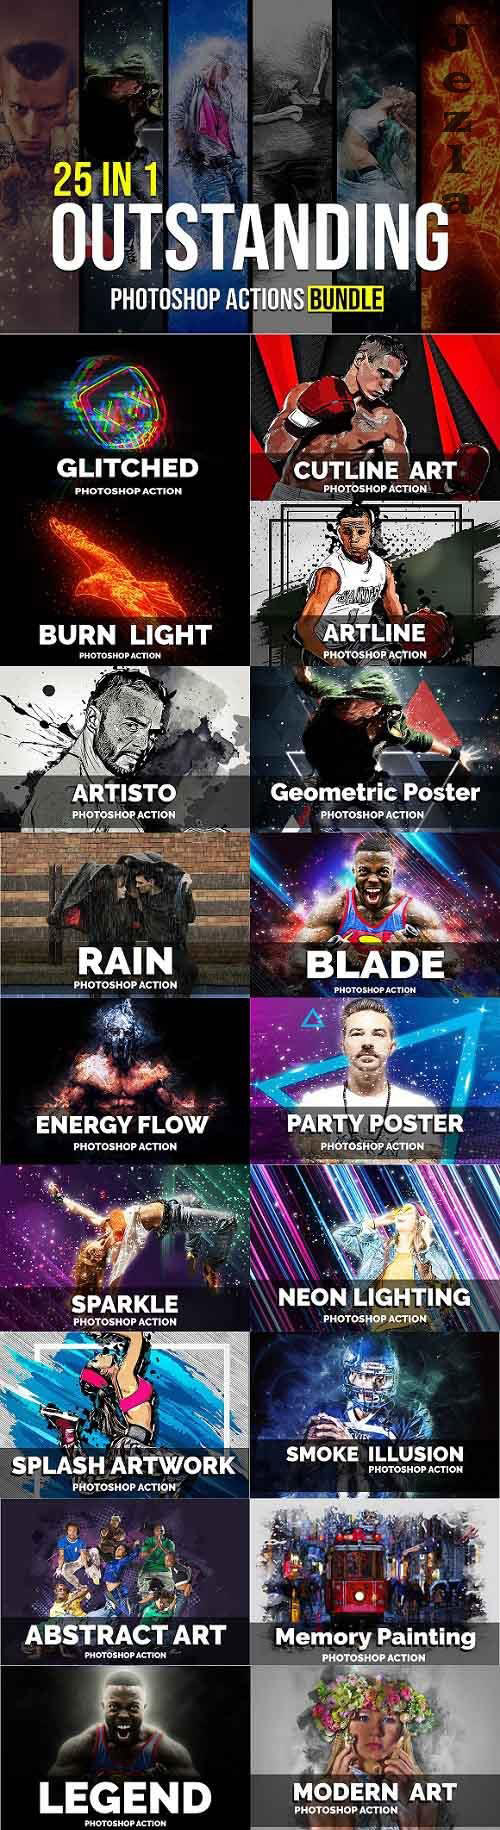 25 In 1 Outstanding Photoshop Actions Bundle - 5299135